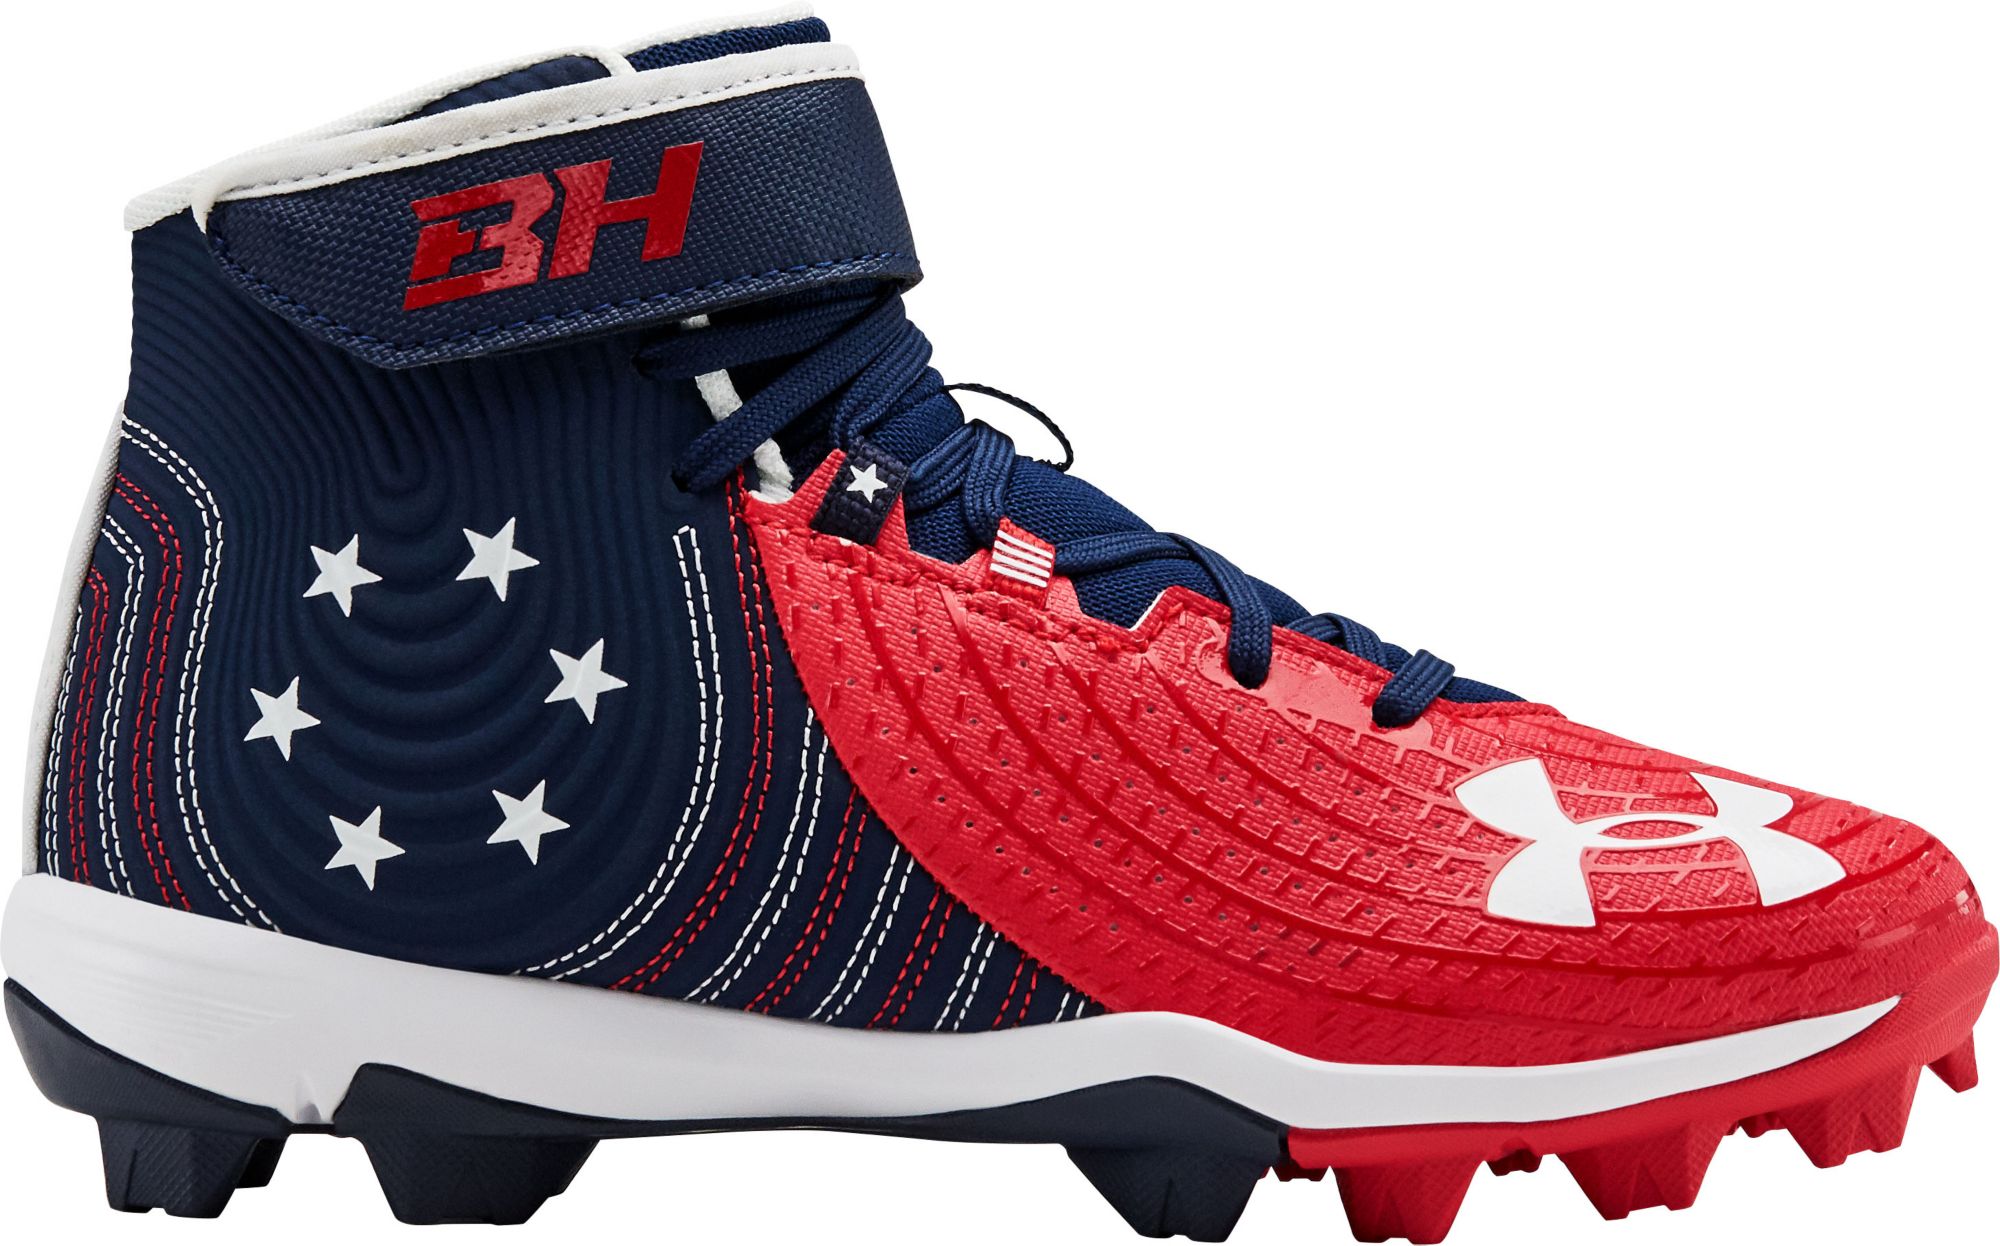 under armour stars and stripes baseball cleats